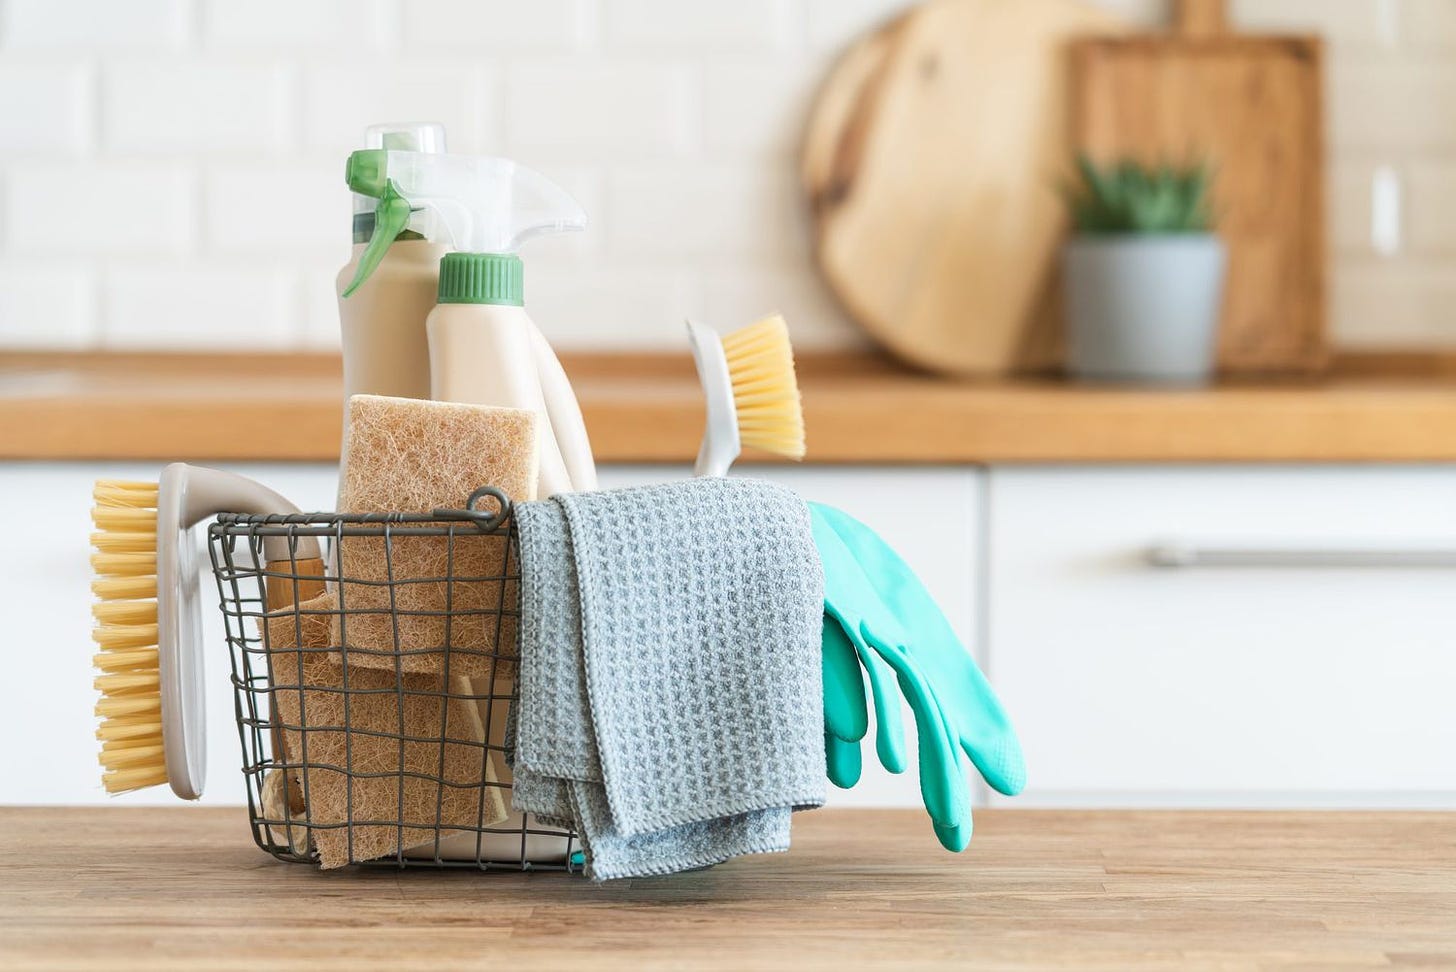 Your Ultimate Spring-Cleaning Checklist